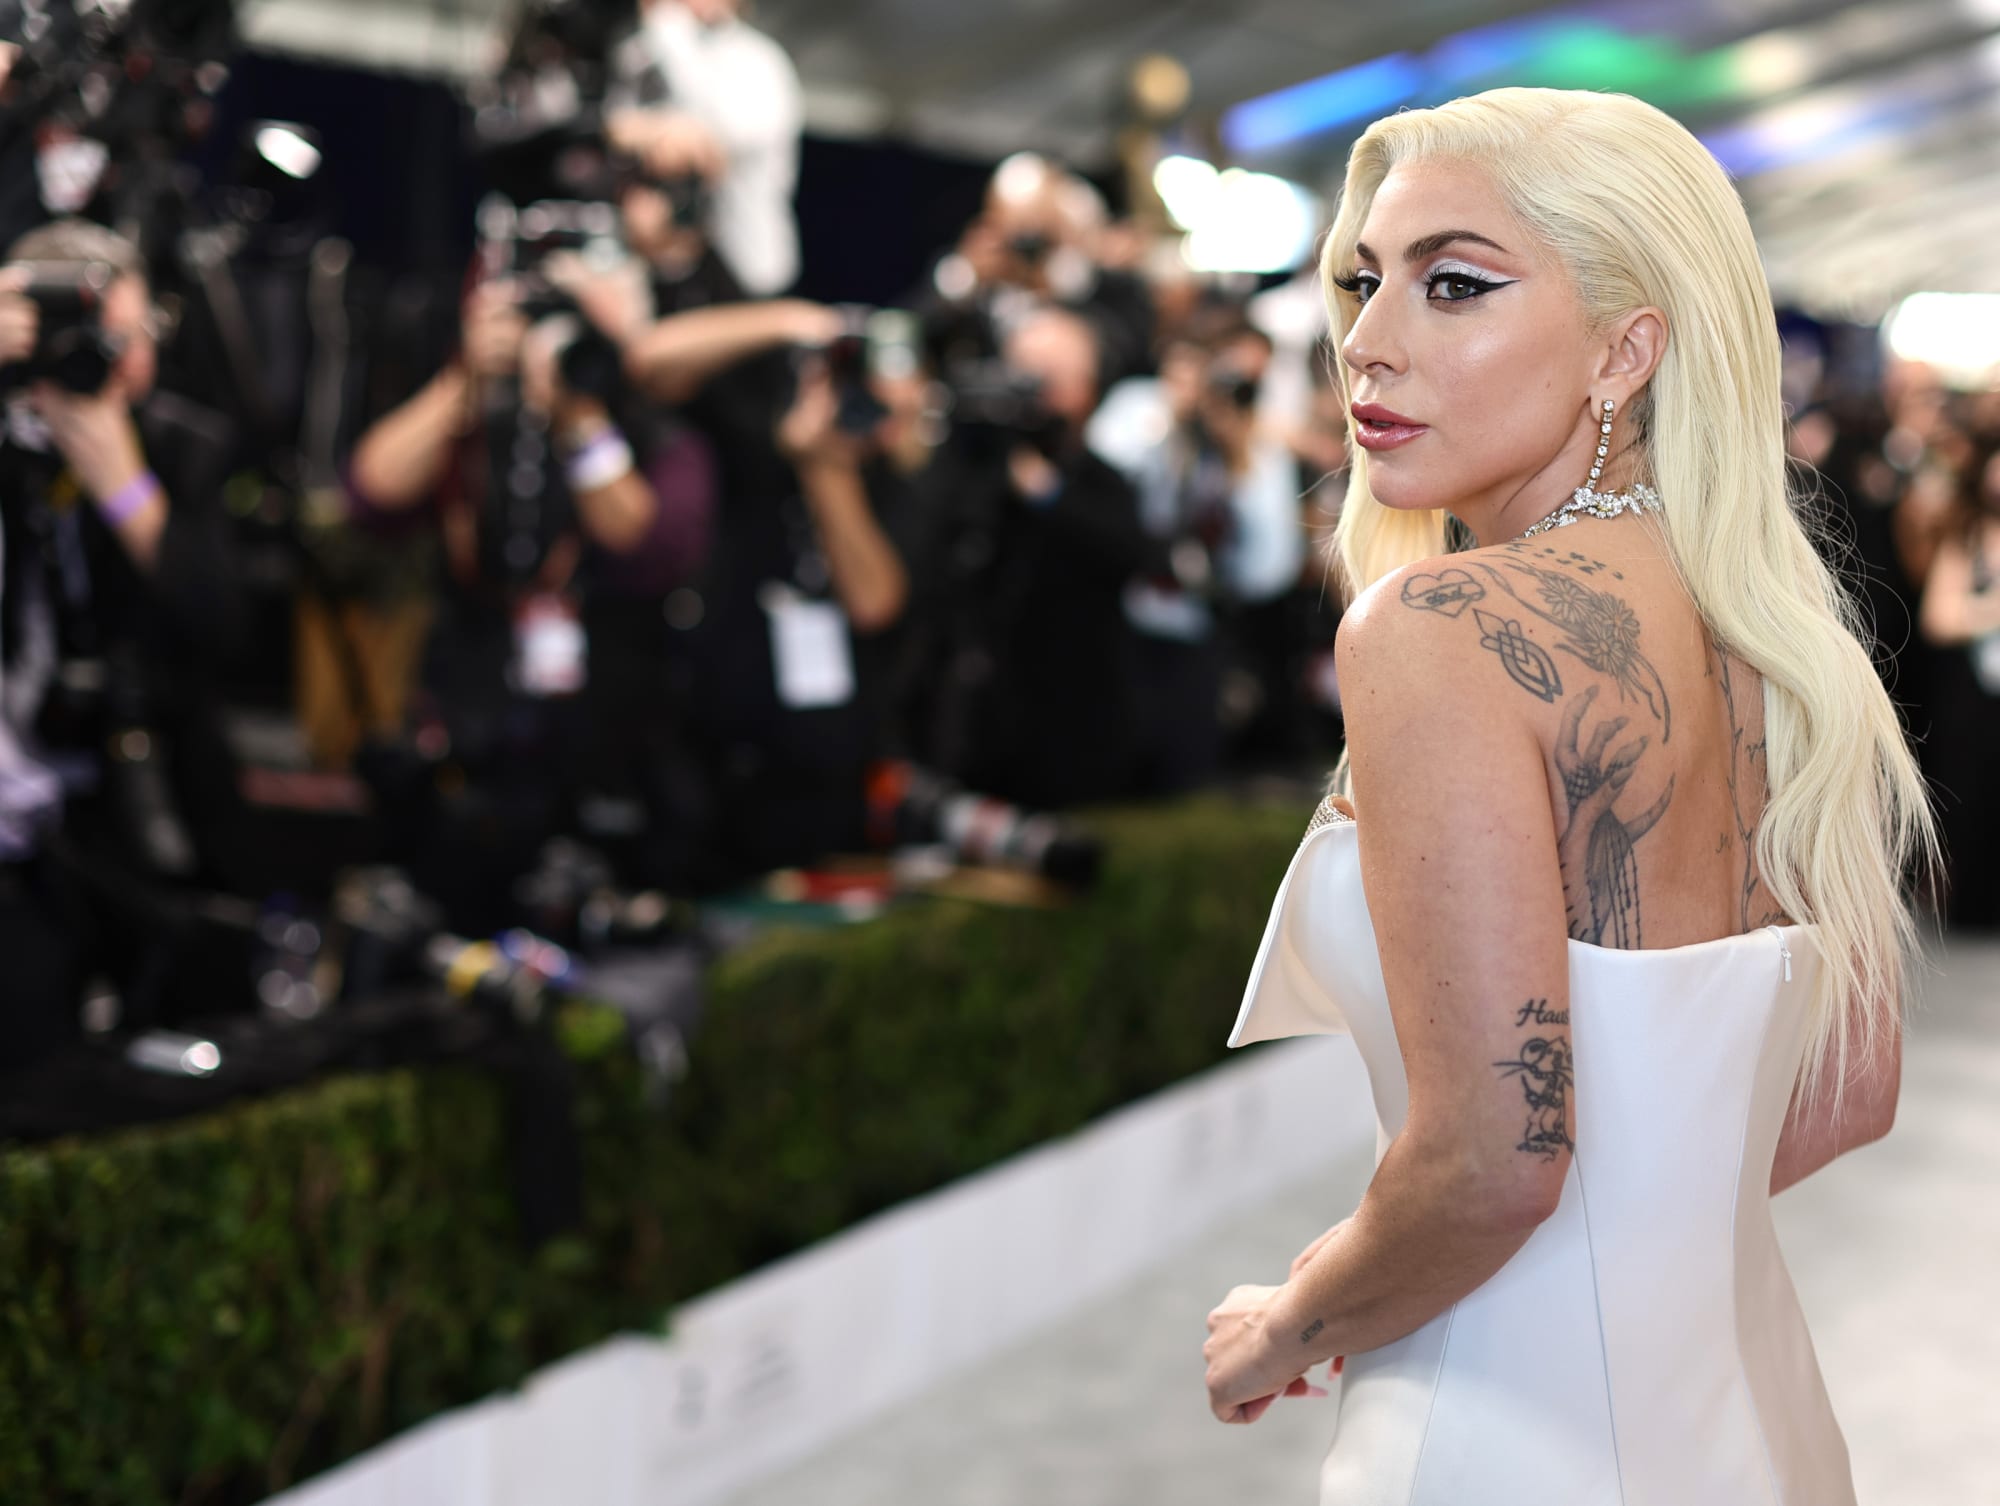 Who is Lady Gaga dating? The singer's relationship status